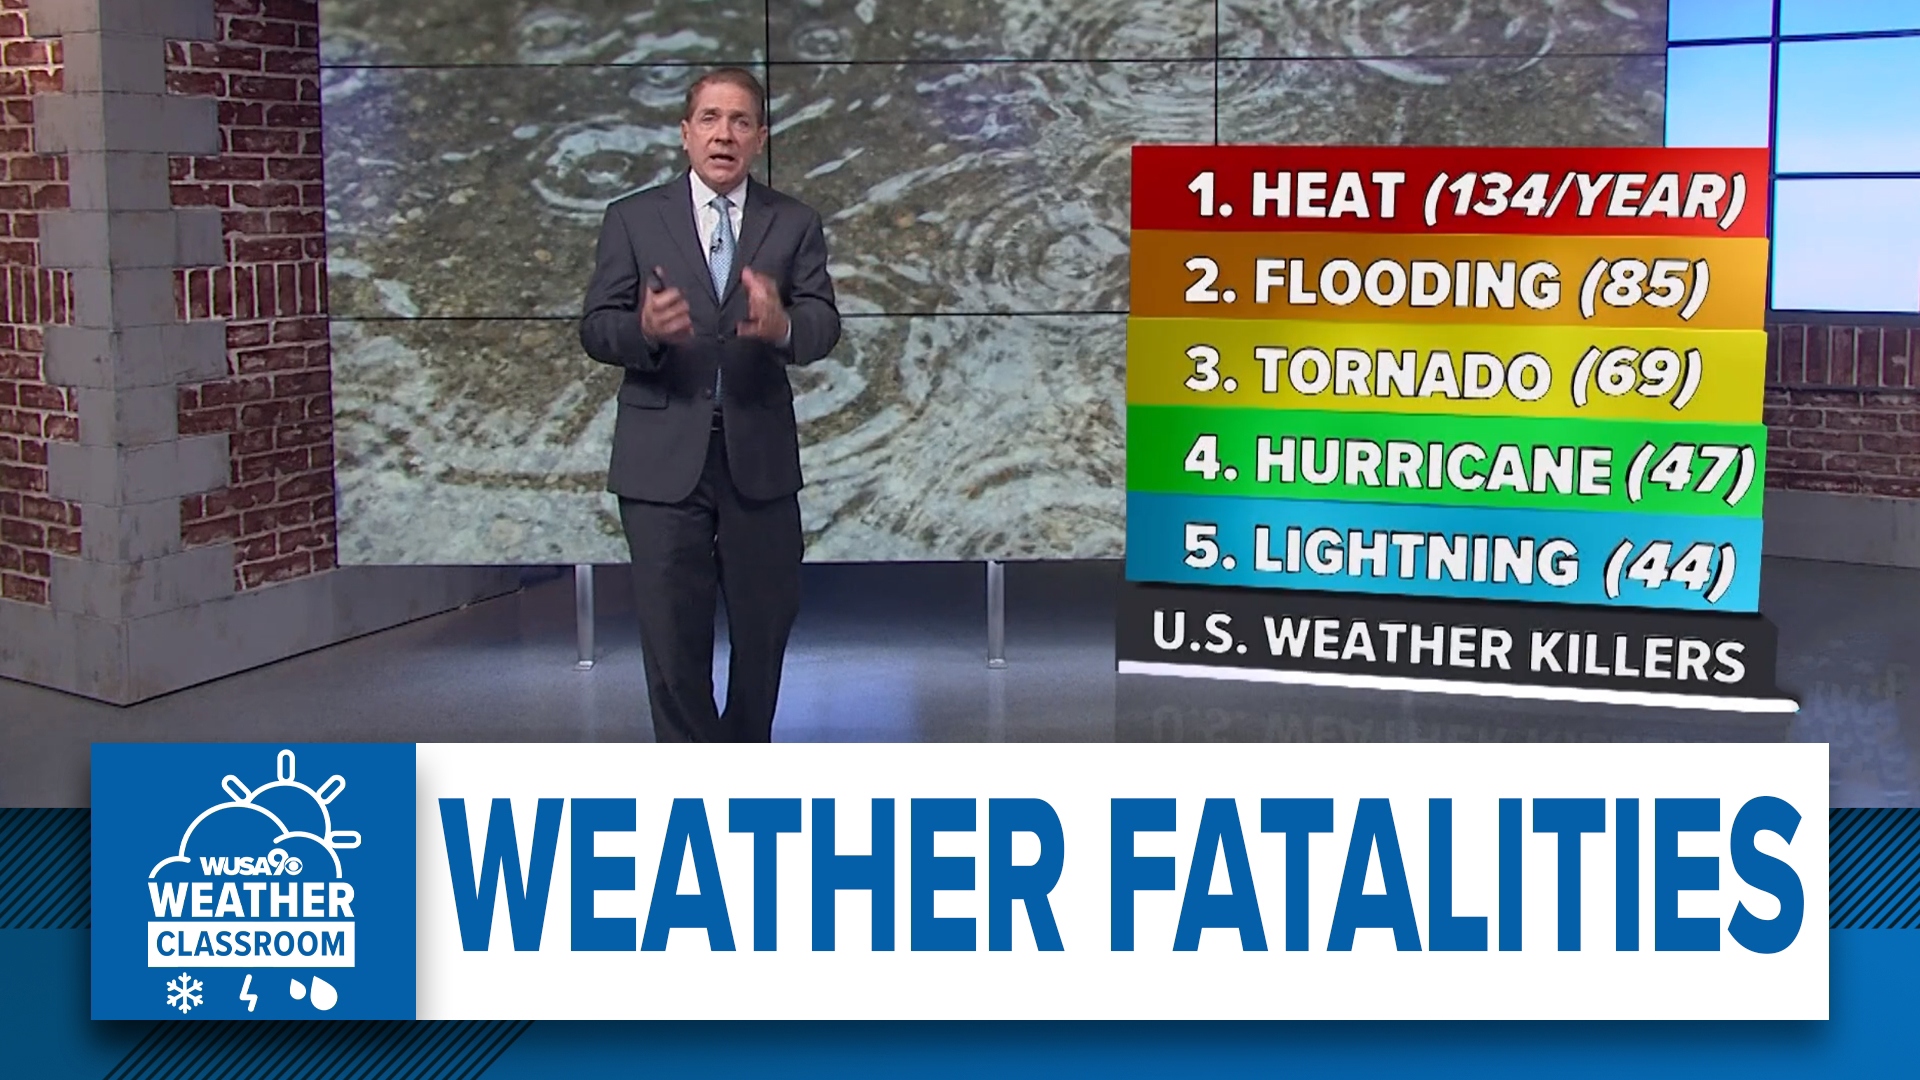 Meteorologist Topper Shutt shows us the top 5 causes of weather related fatalities.